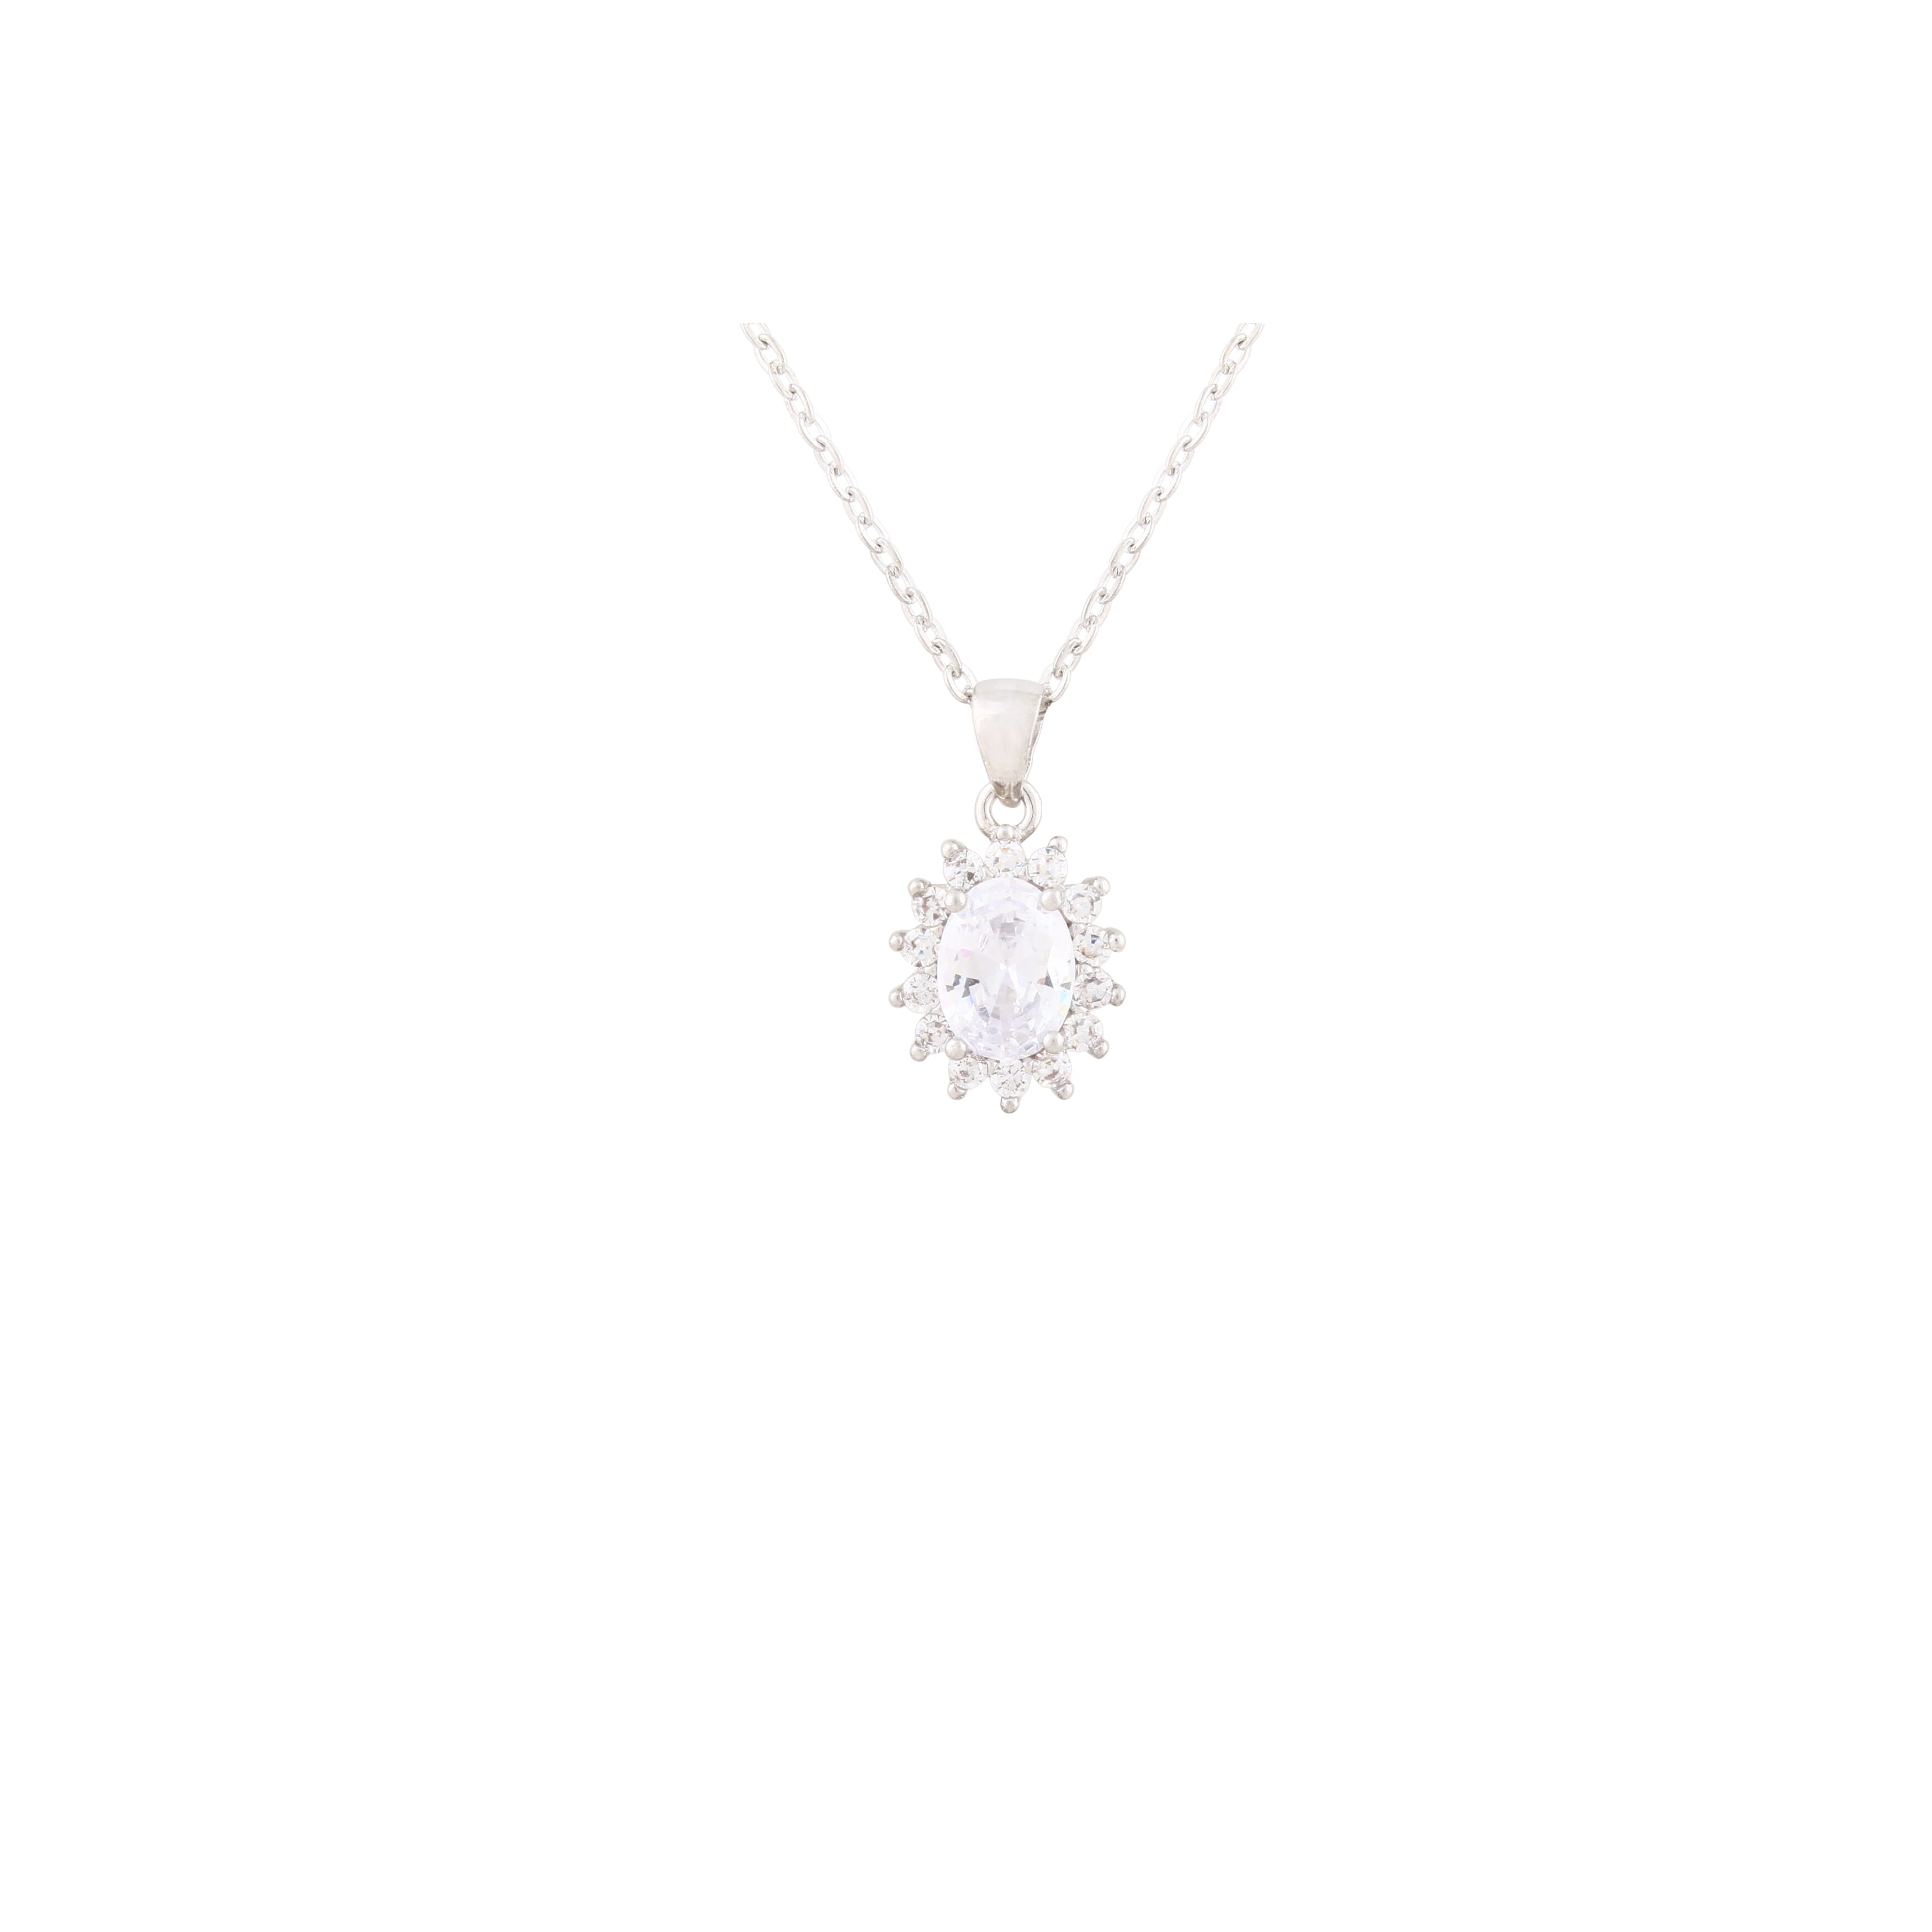 Asfour Crystal 925 Sterling Silver Chain Necklace With Oval Pendant